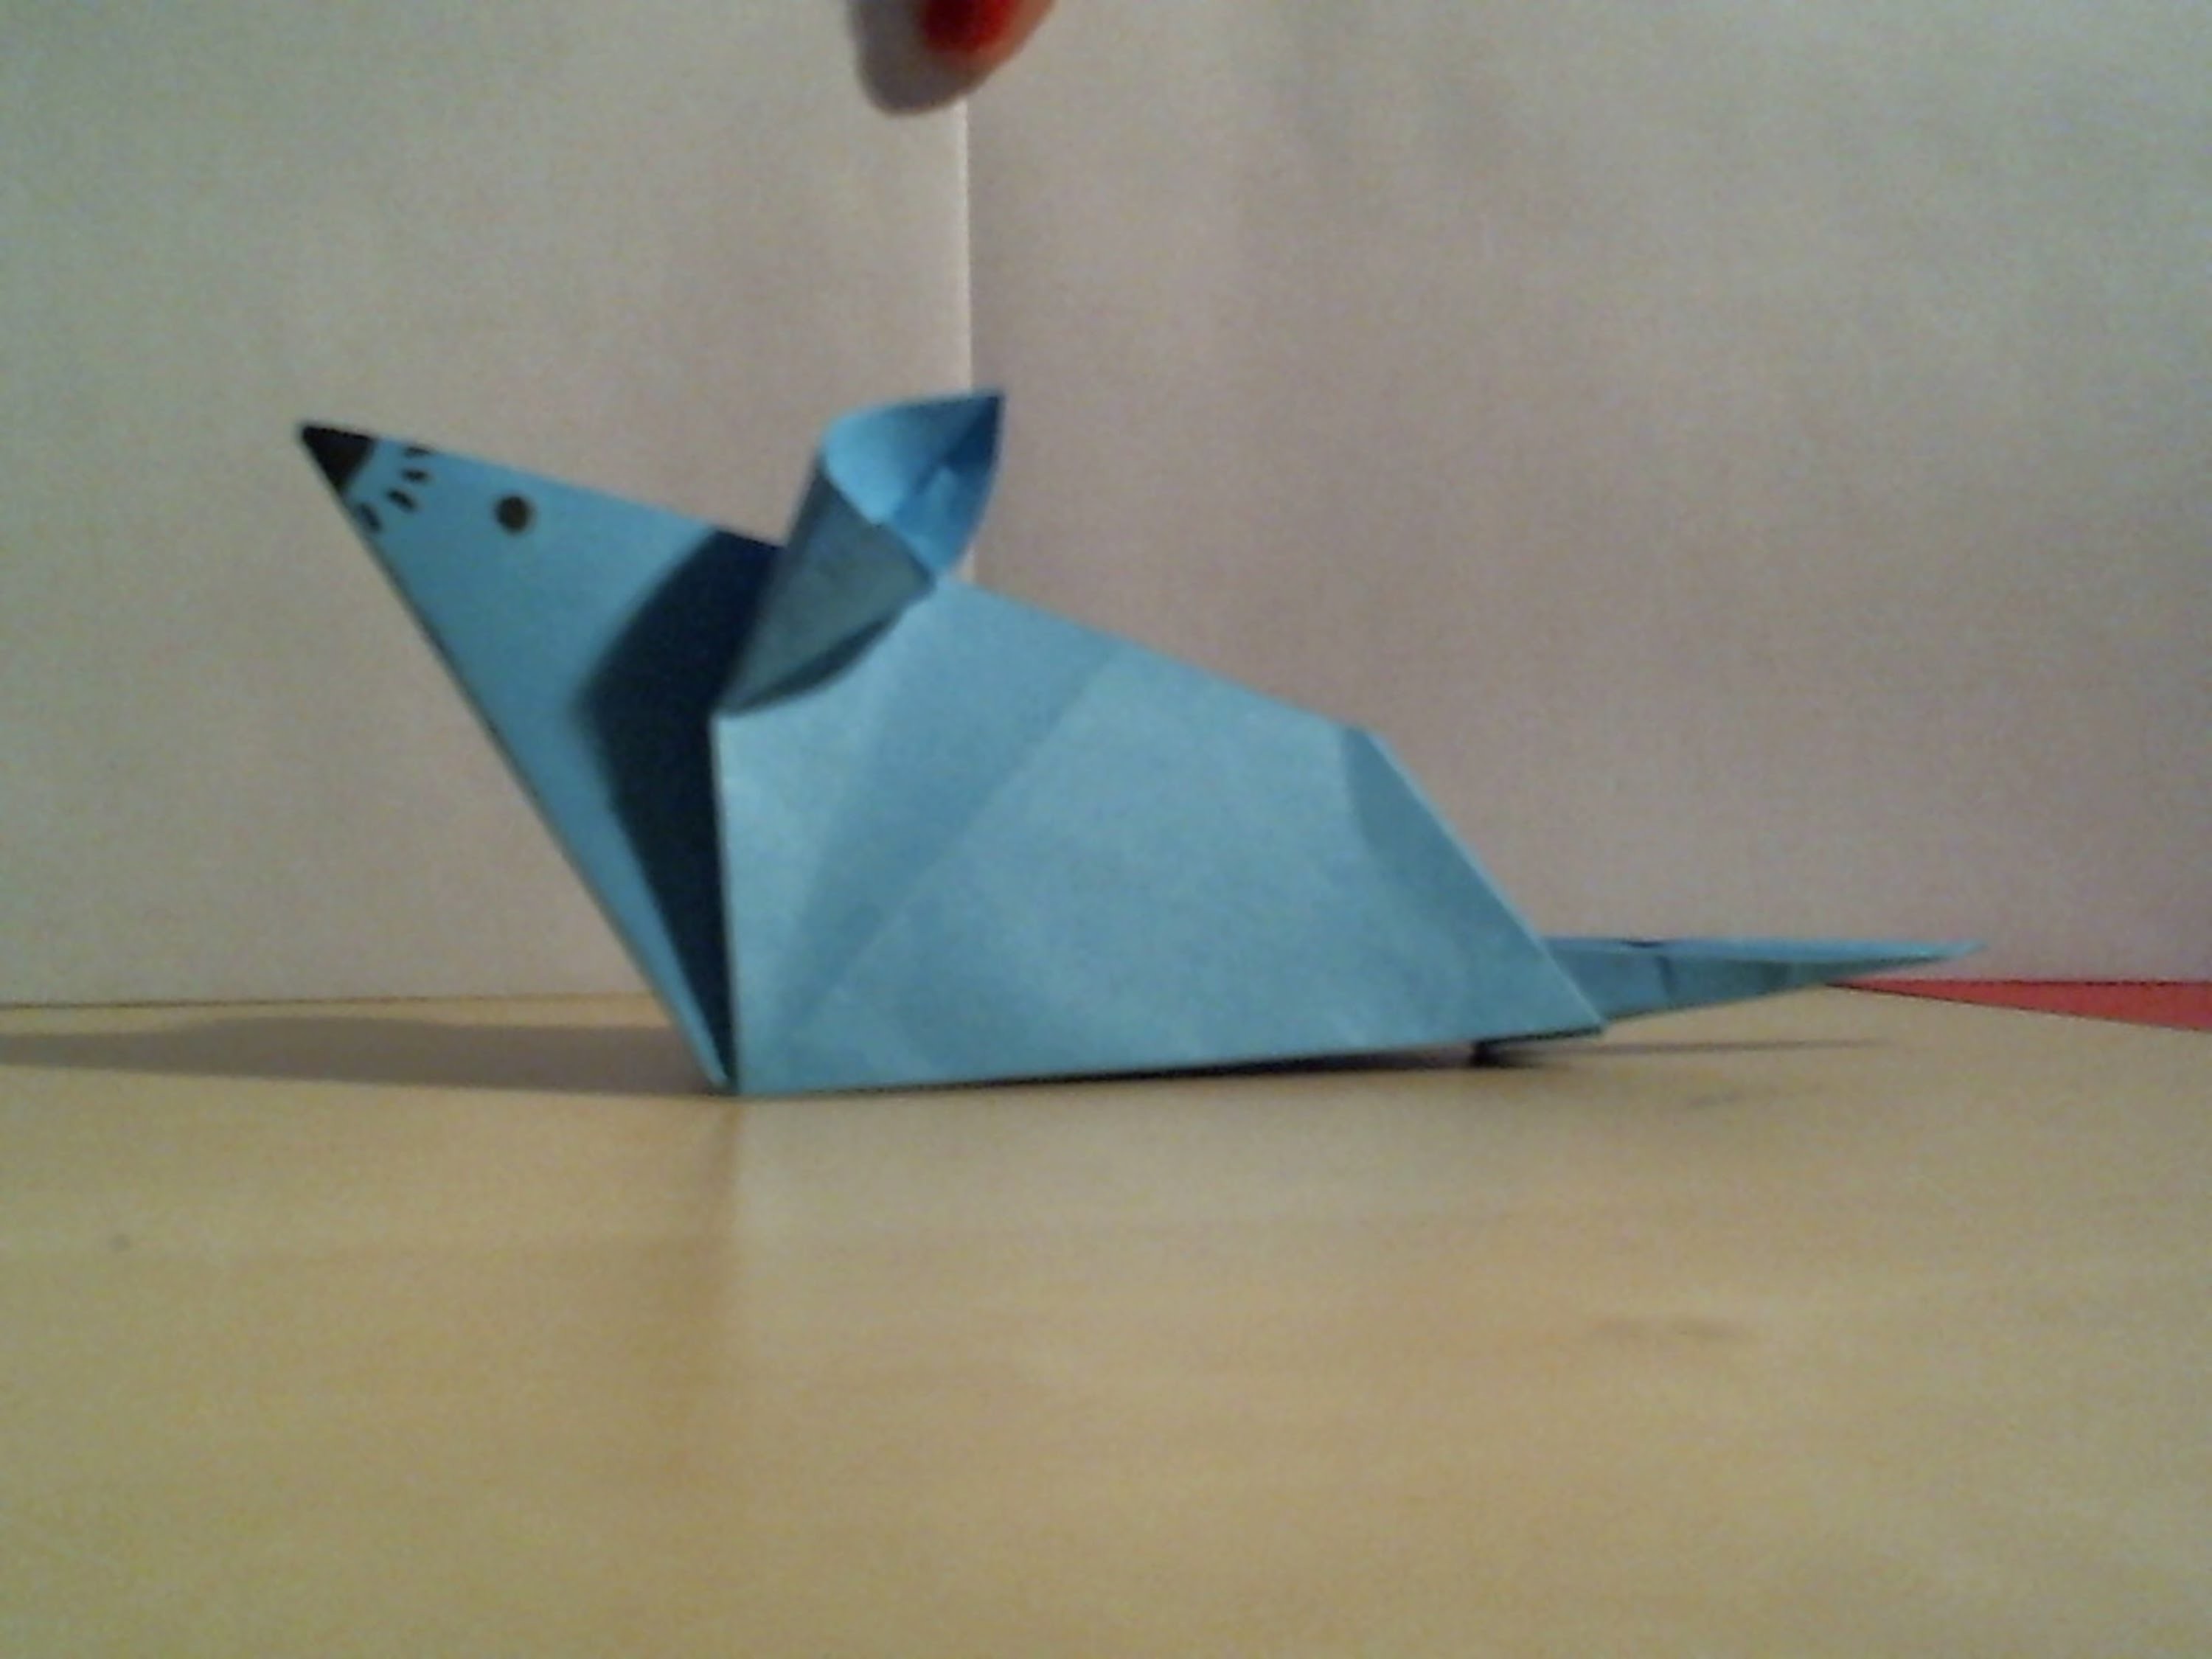 How to fold an origami mouse. Hoe vouw je een origami muis